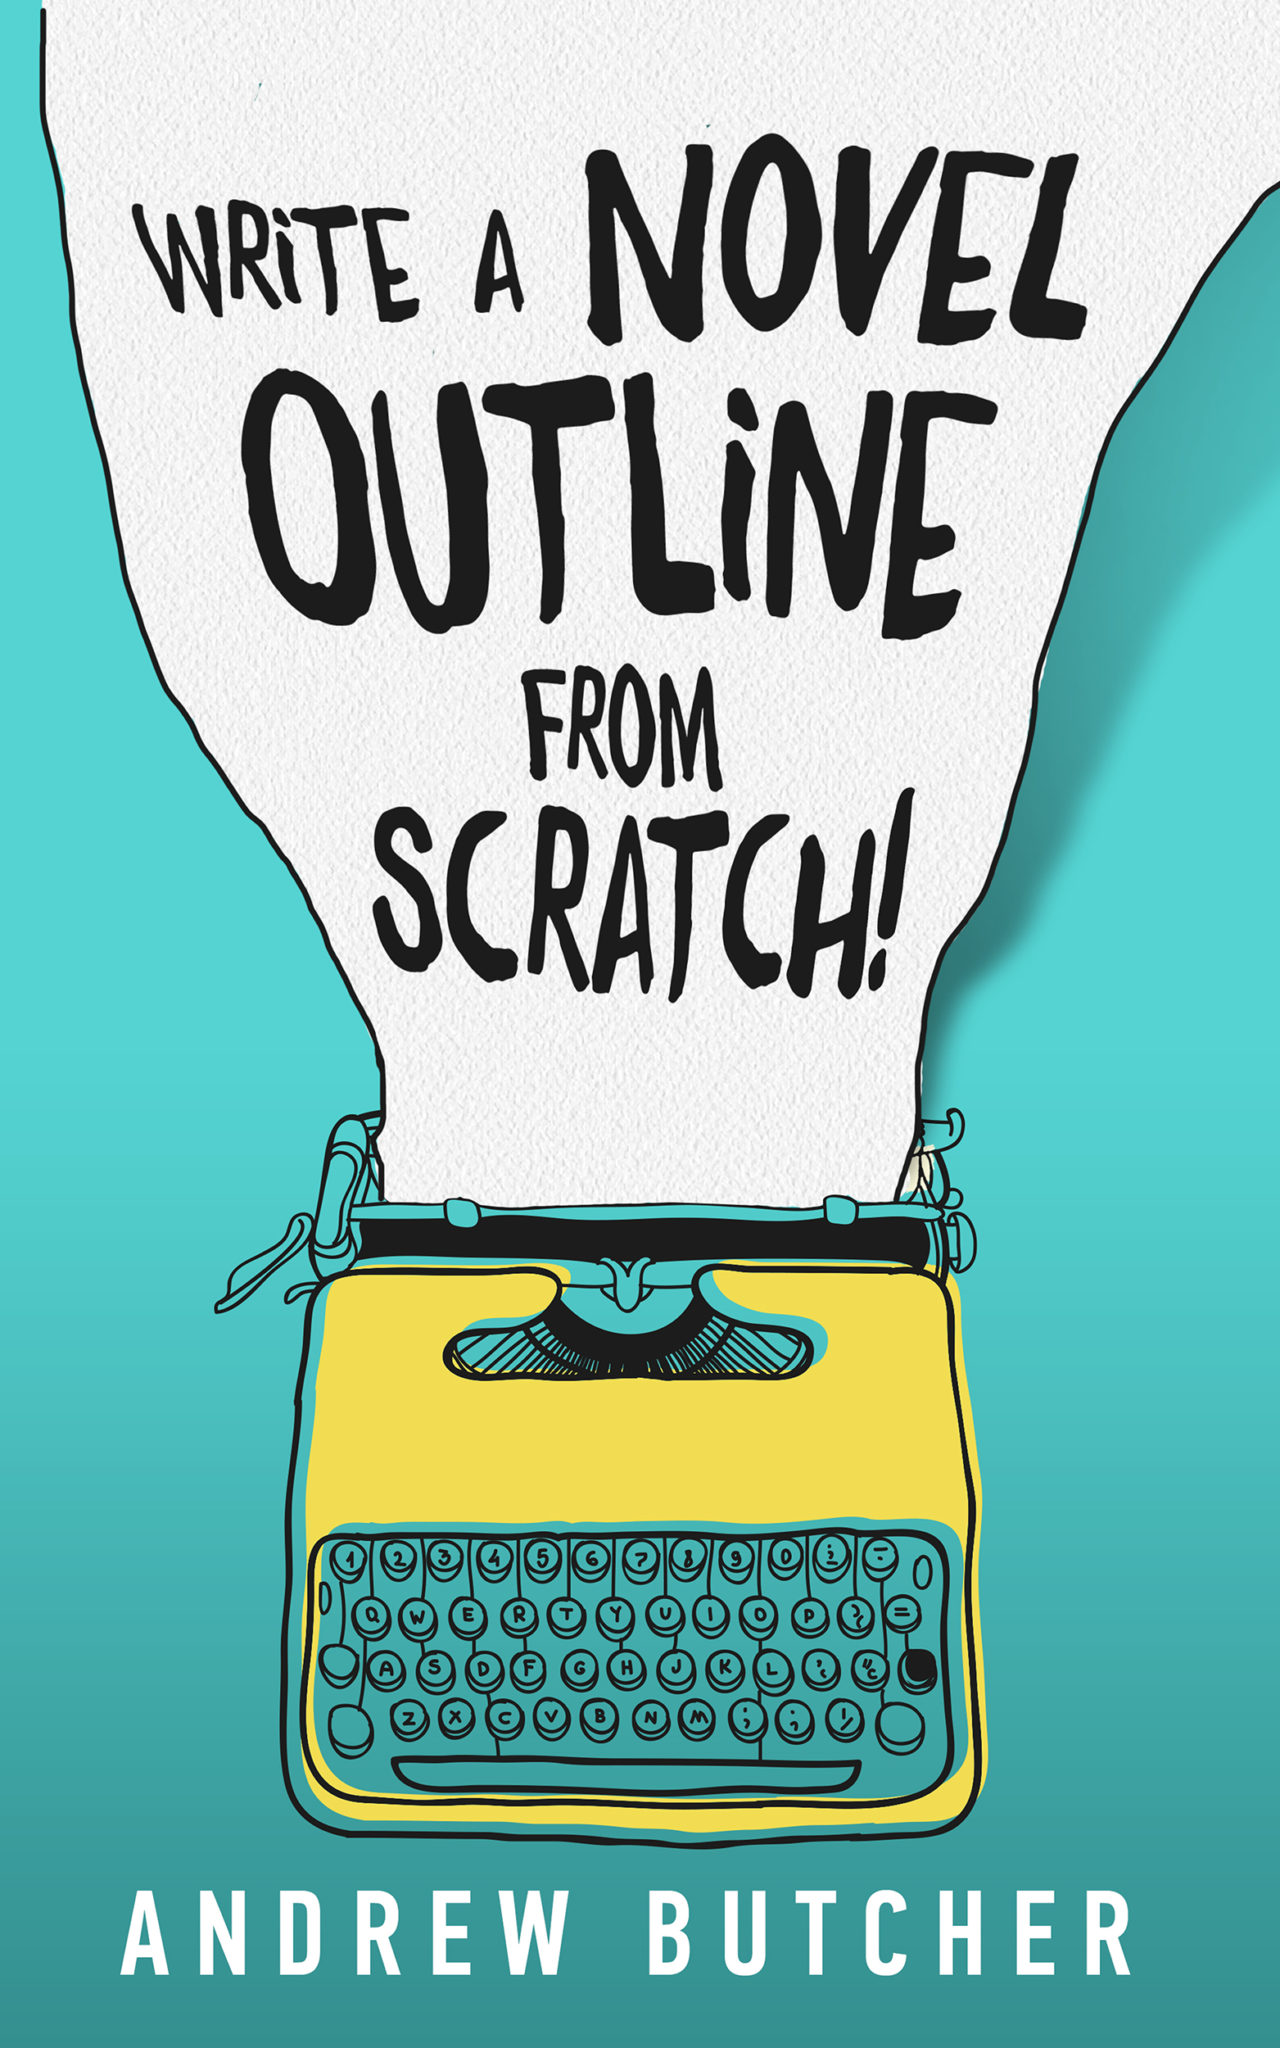 FREE: Write a Novel Outline from Scratch! by Andrew Butcher